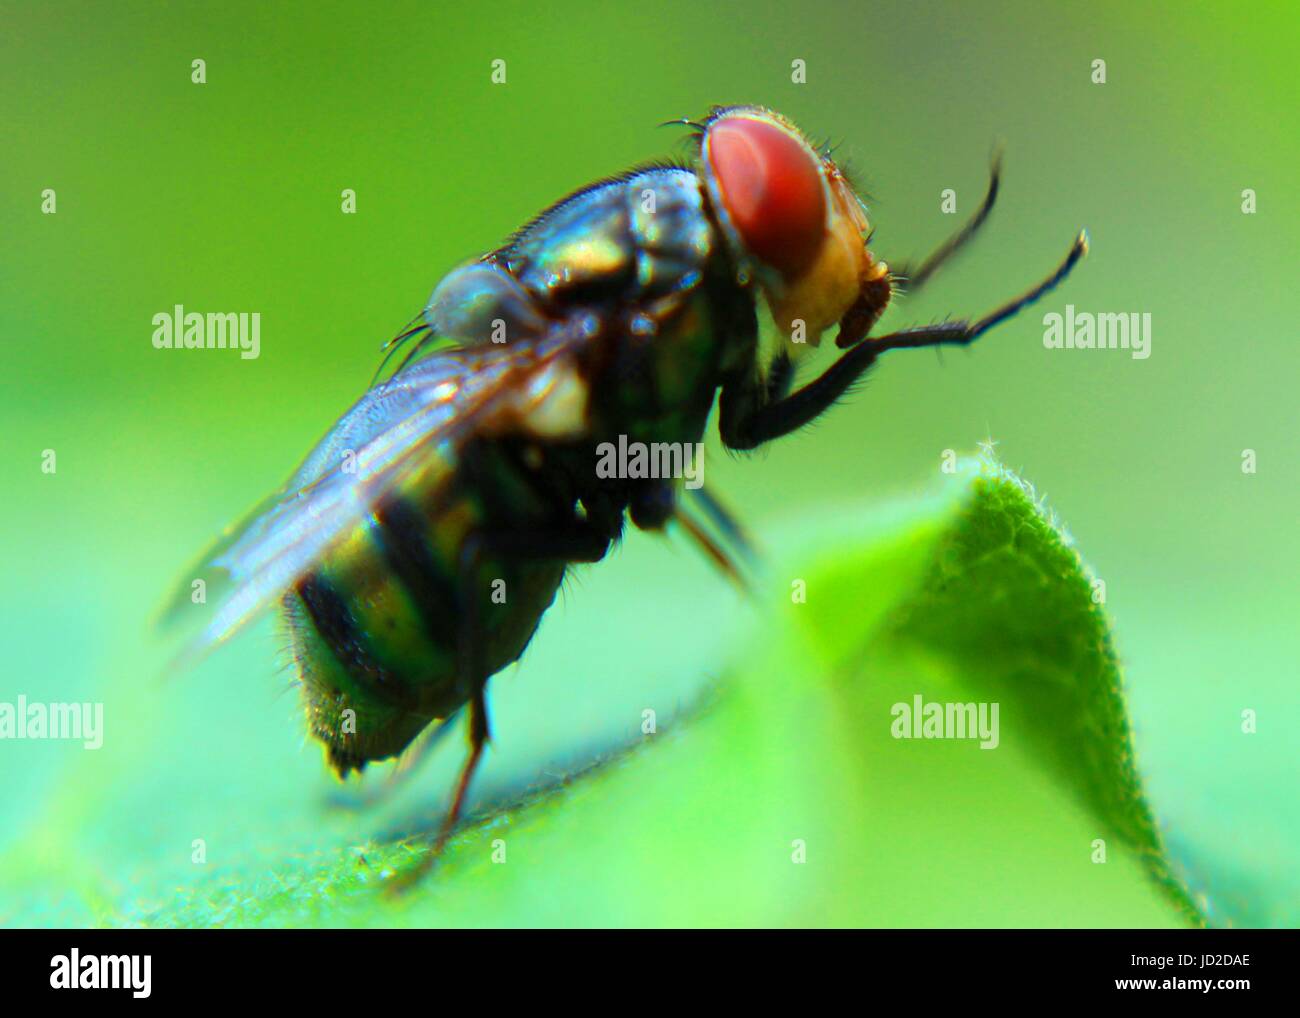 macro - close up view of a common green bottle fly with red color compound eyes Stock Photo